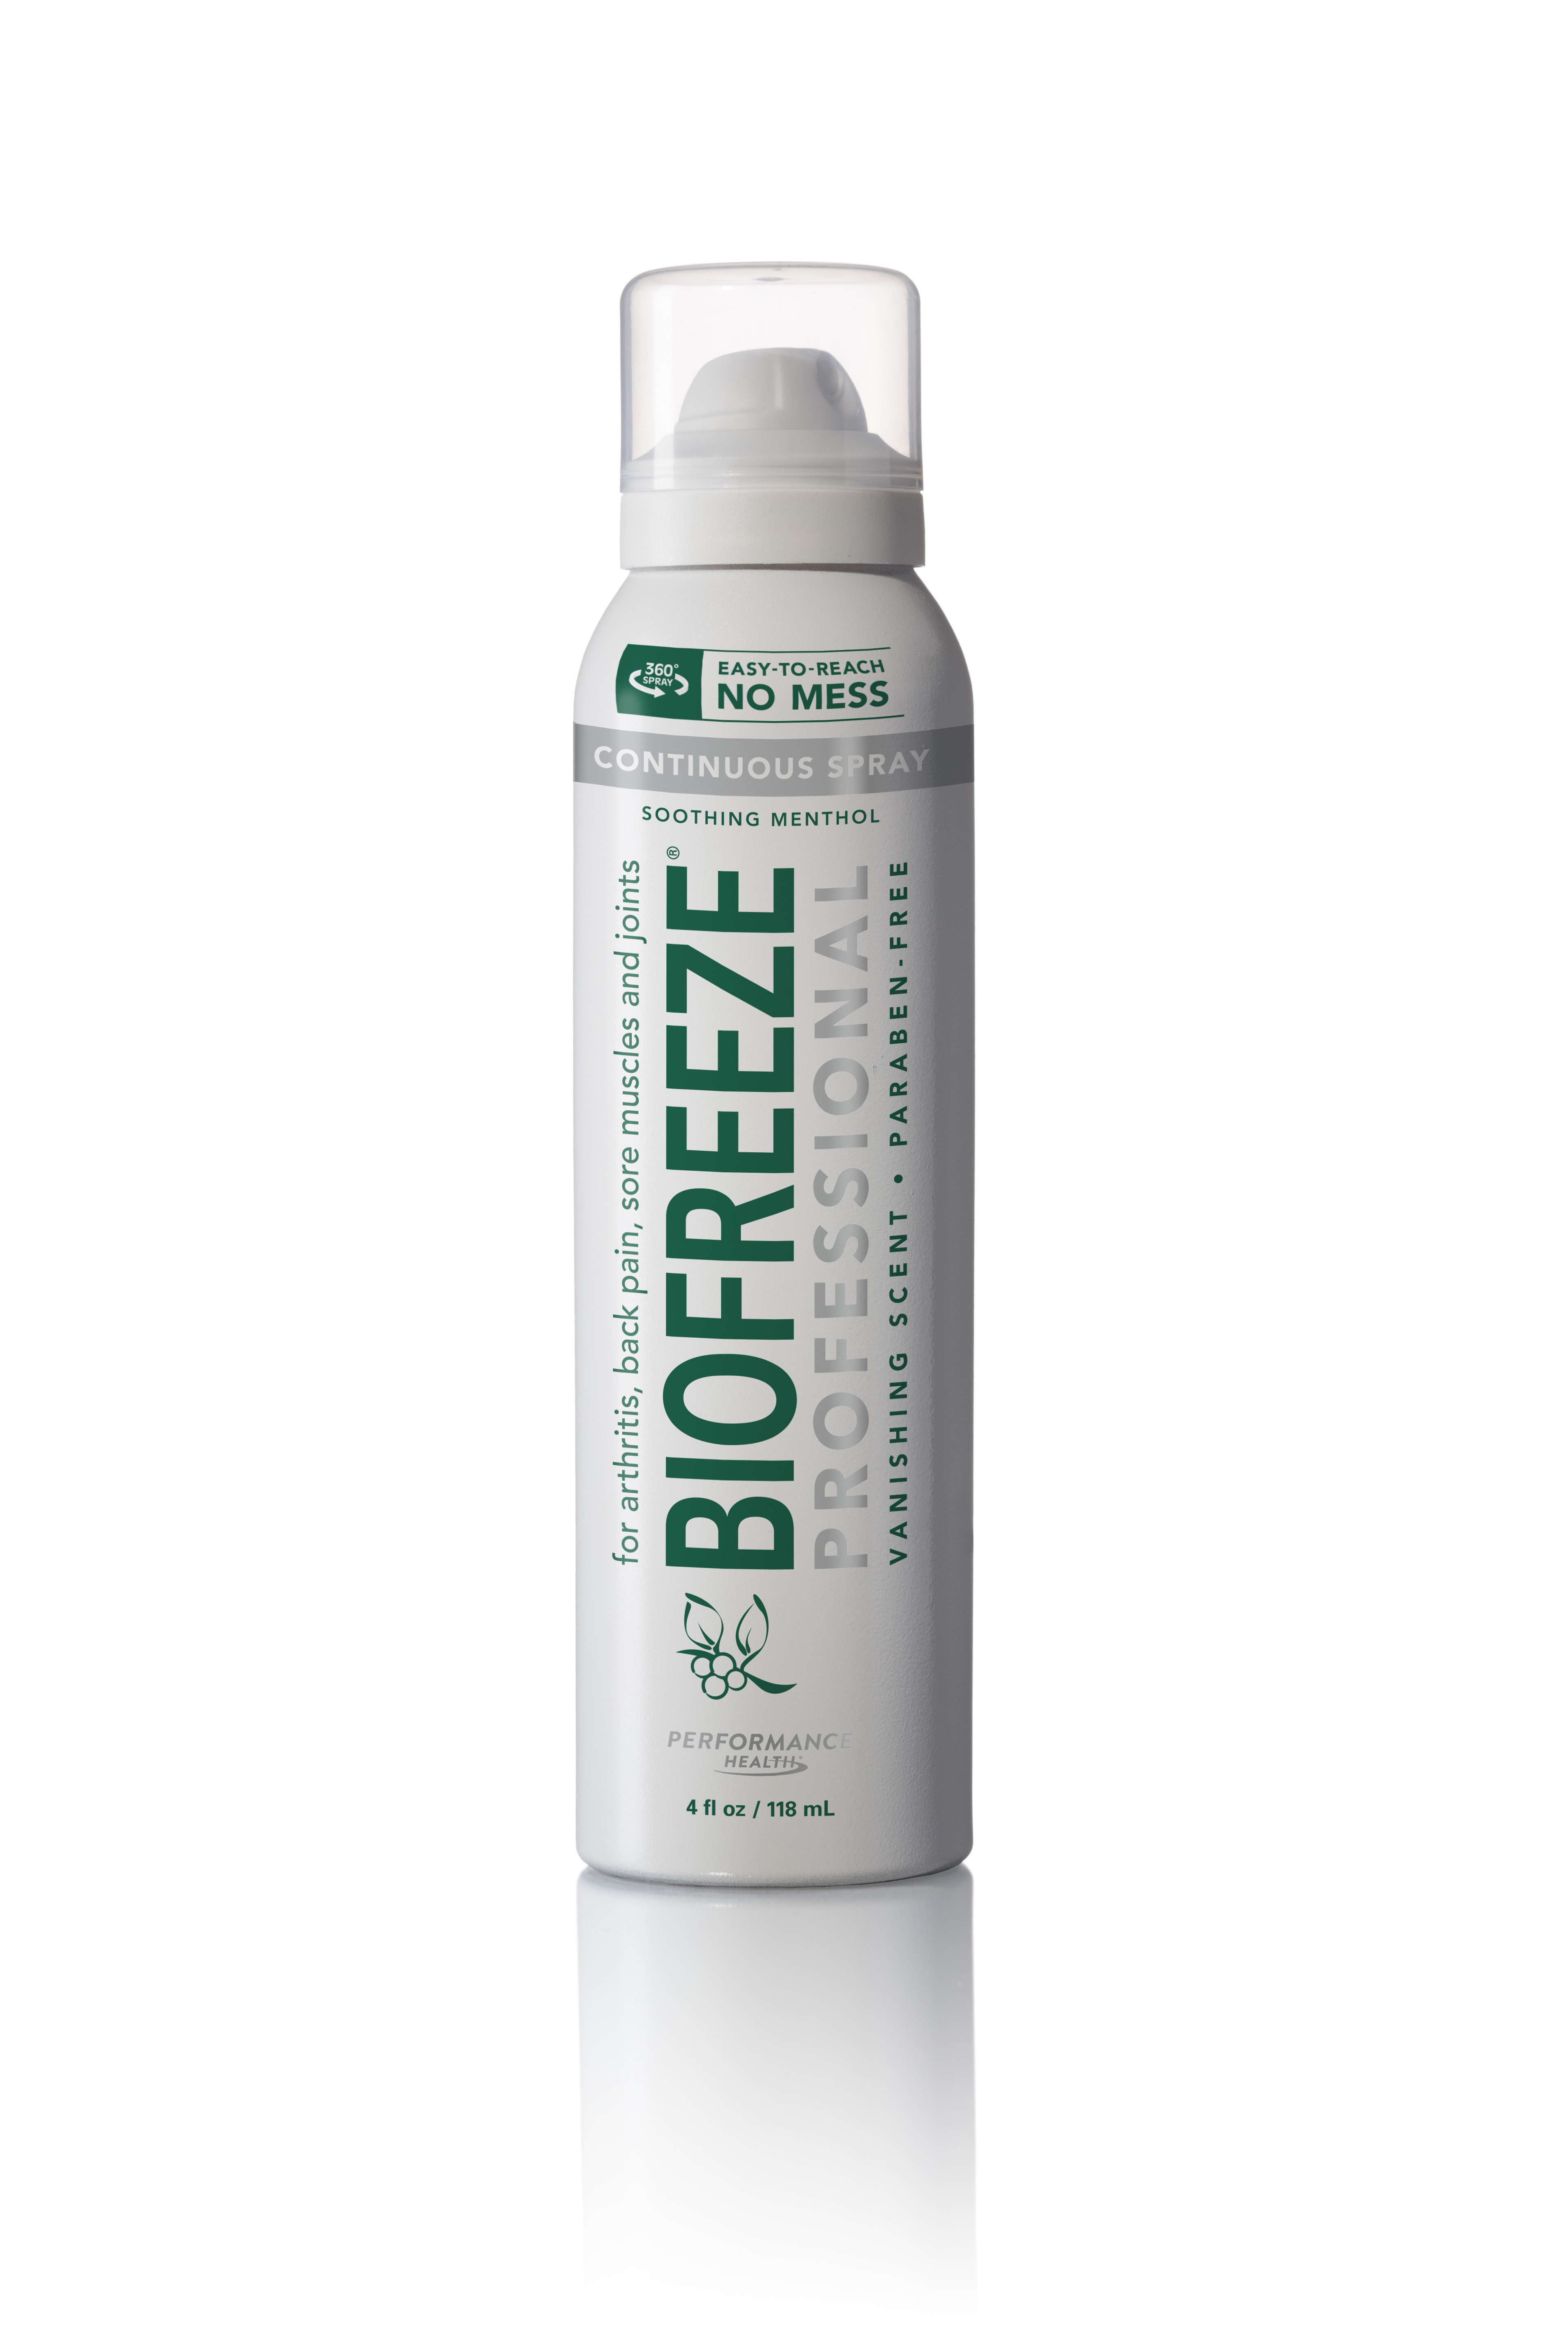 Biofreeze Professional Topical Pain Relief Gel Green 1 Gallon